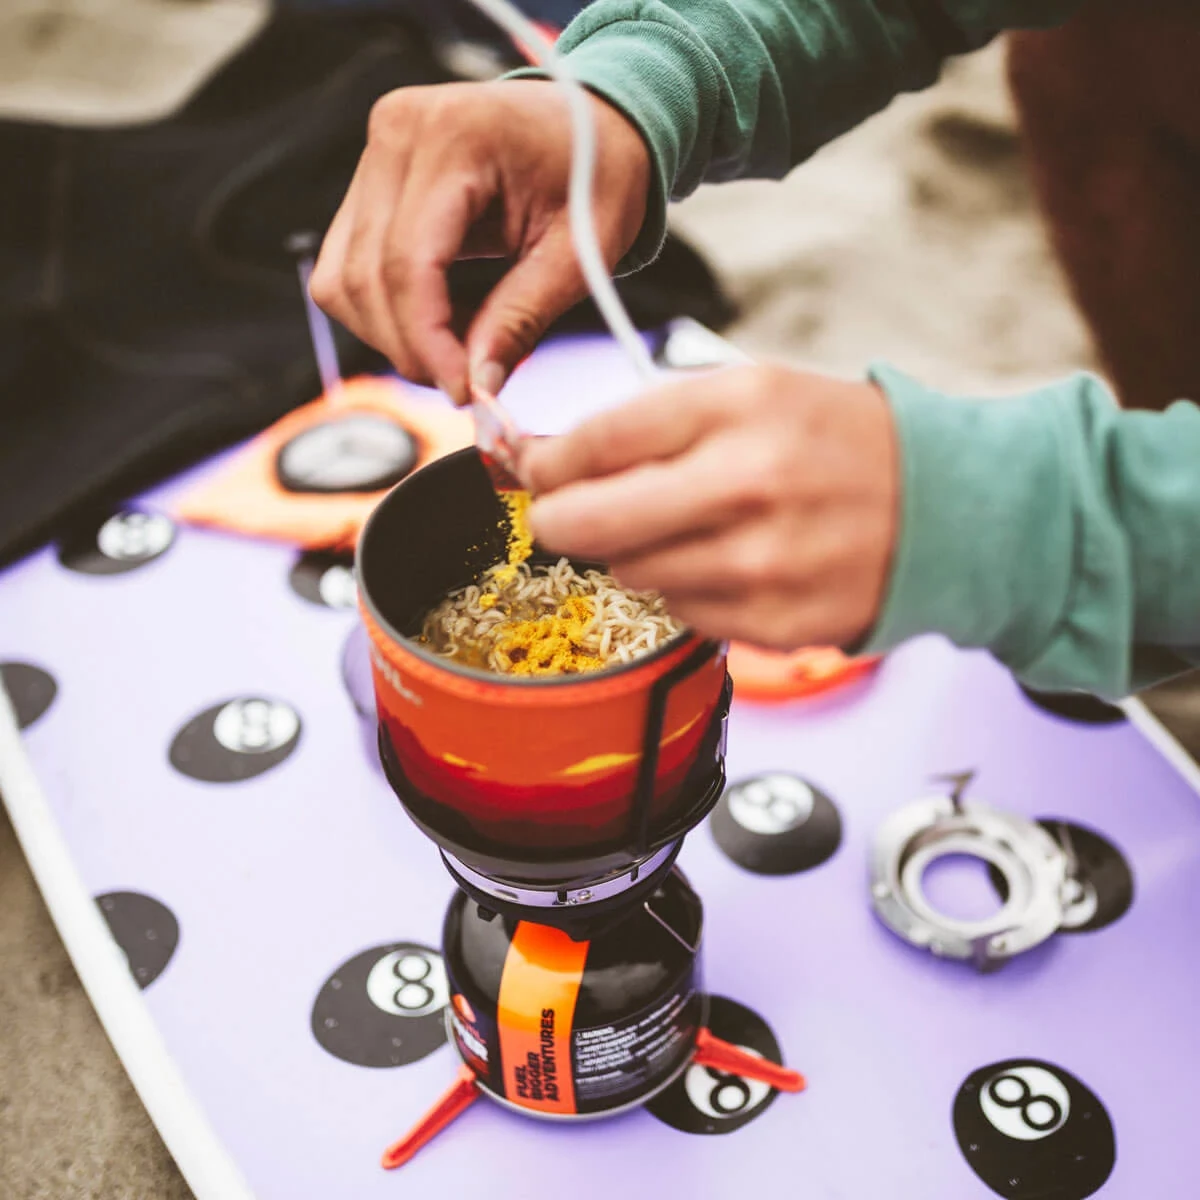 Pouring ramen seasoning packet into cooked ramen in the Jetboil MiniMo